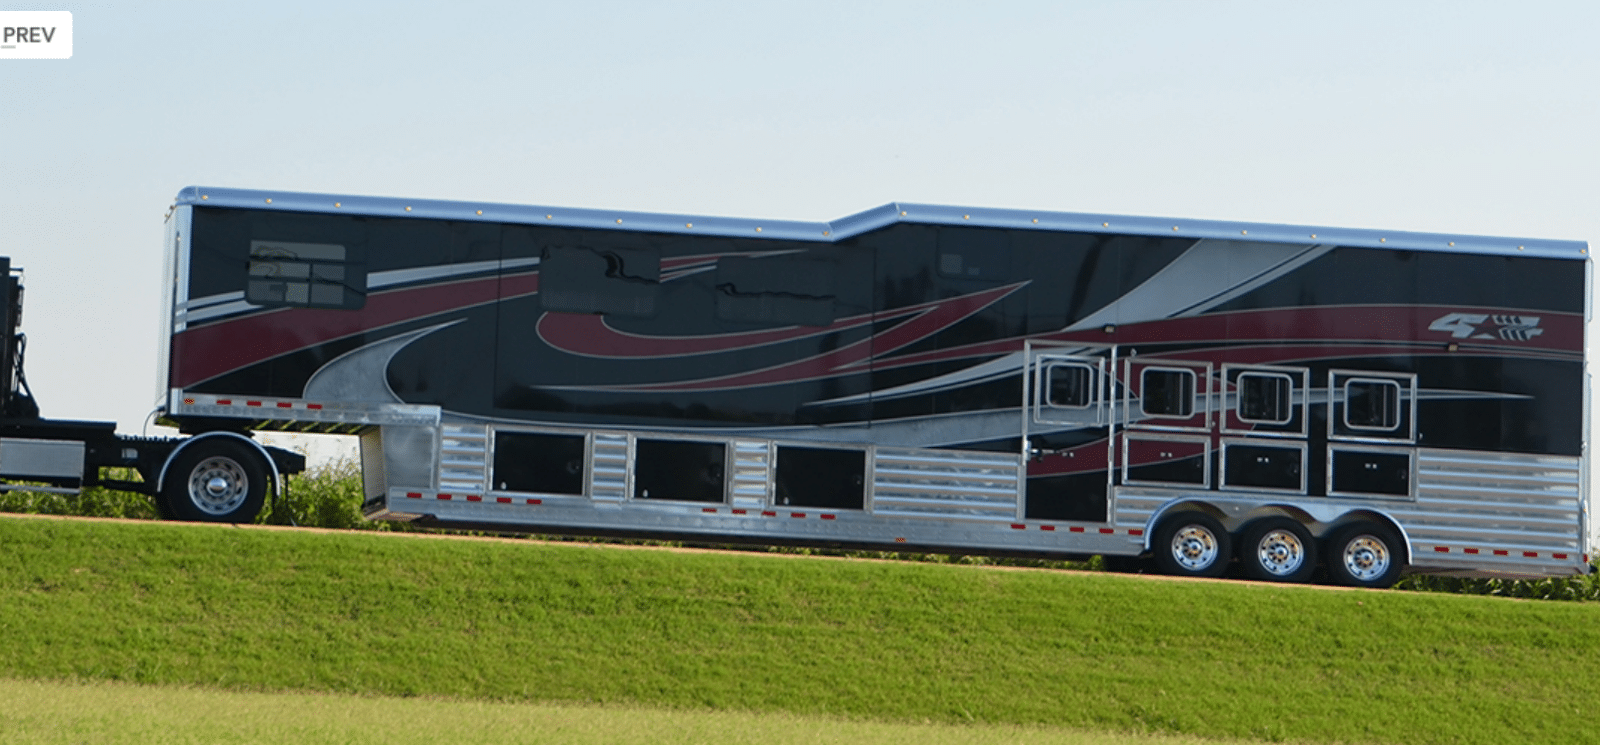 most expensive horse trailer ever